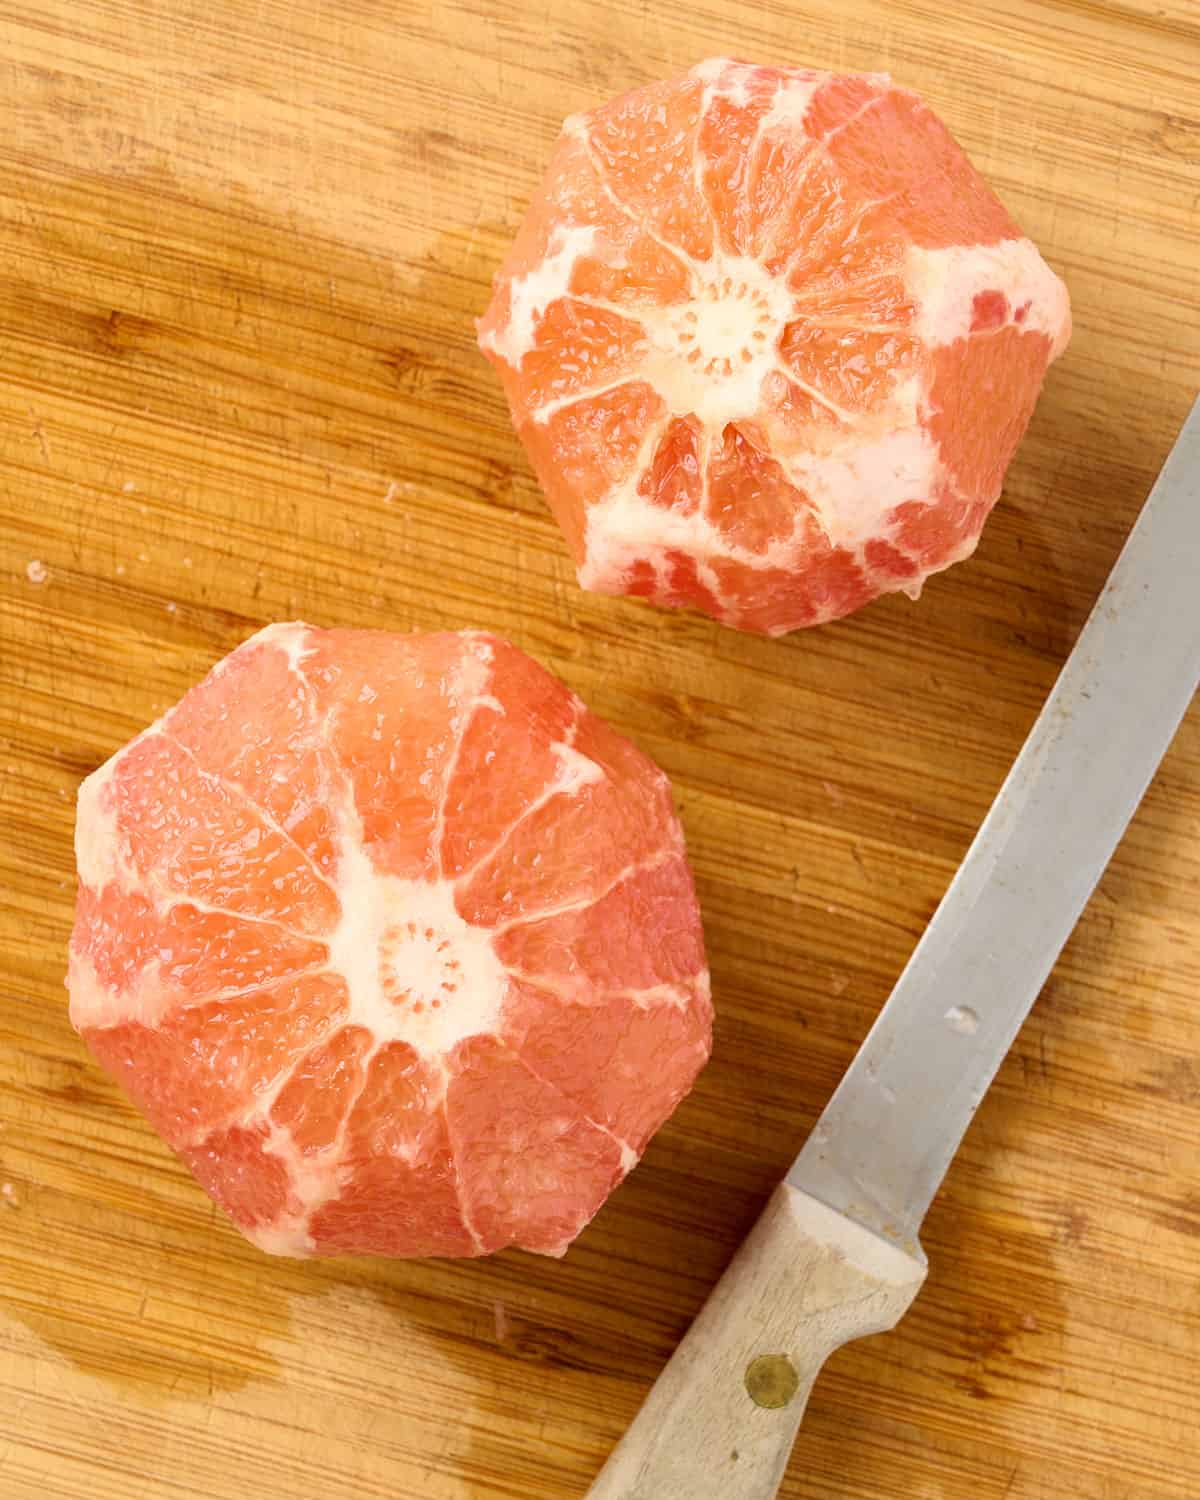 Peels removed from two grapefruits on a cutting board with a knife.